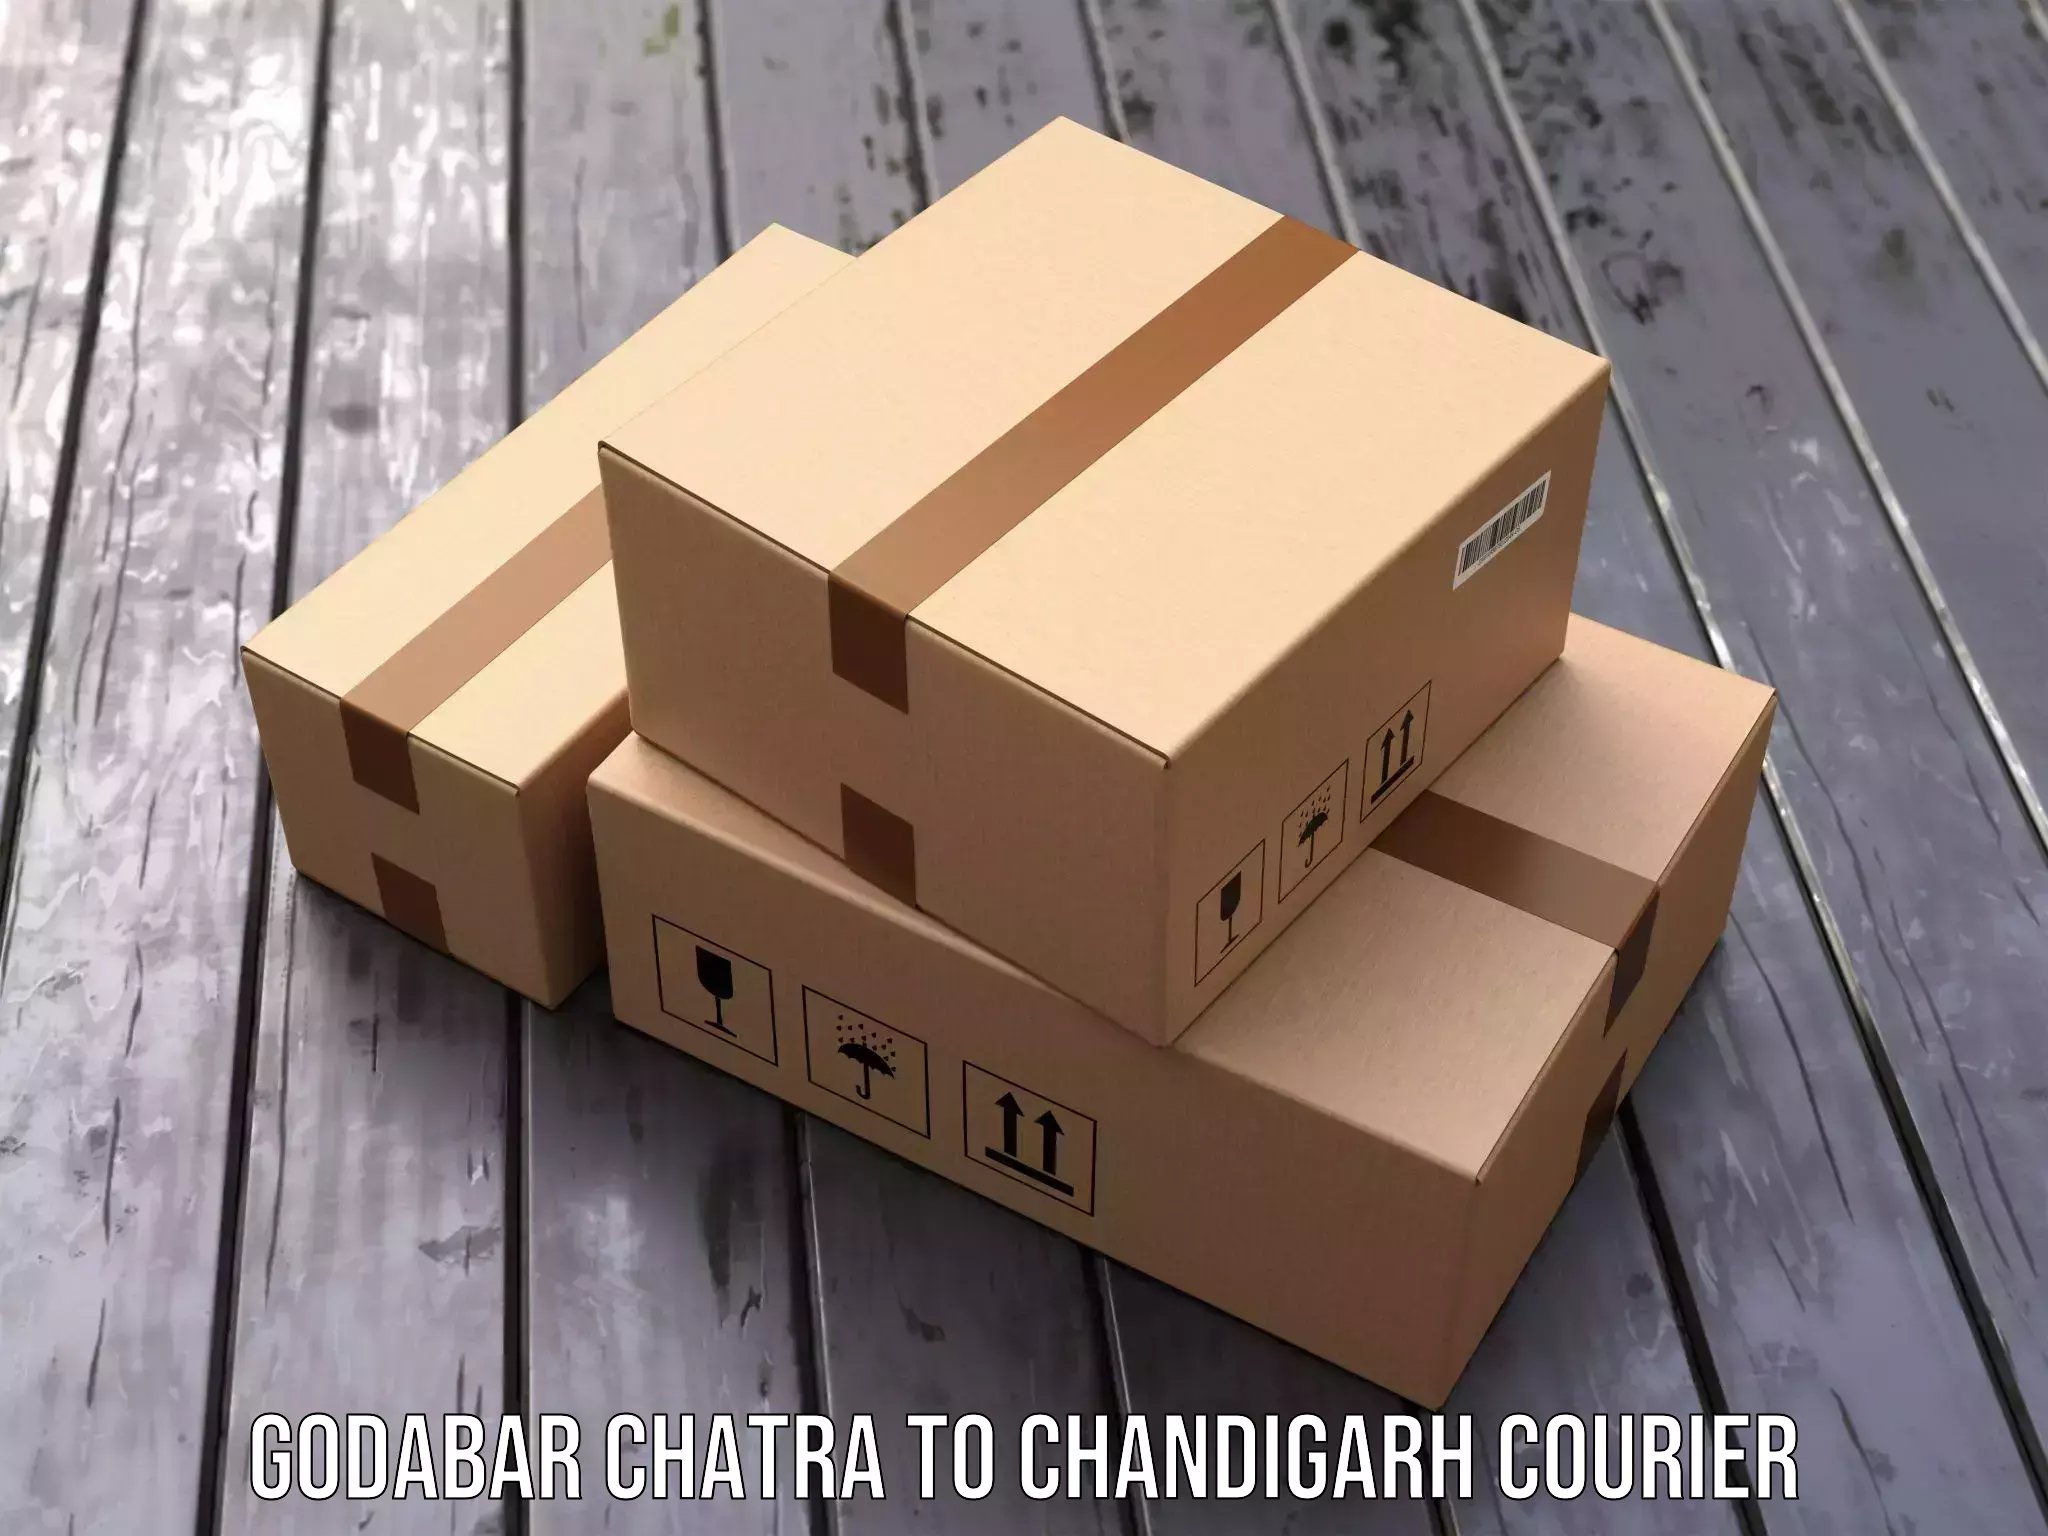 Specialized courier services Godabar Chatra to Chandigarh